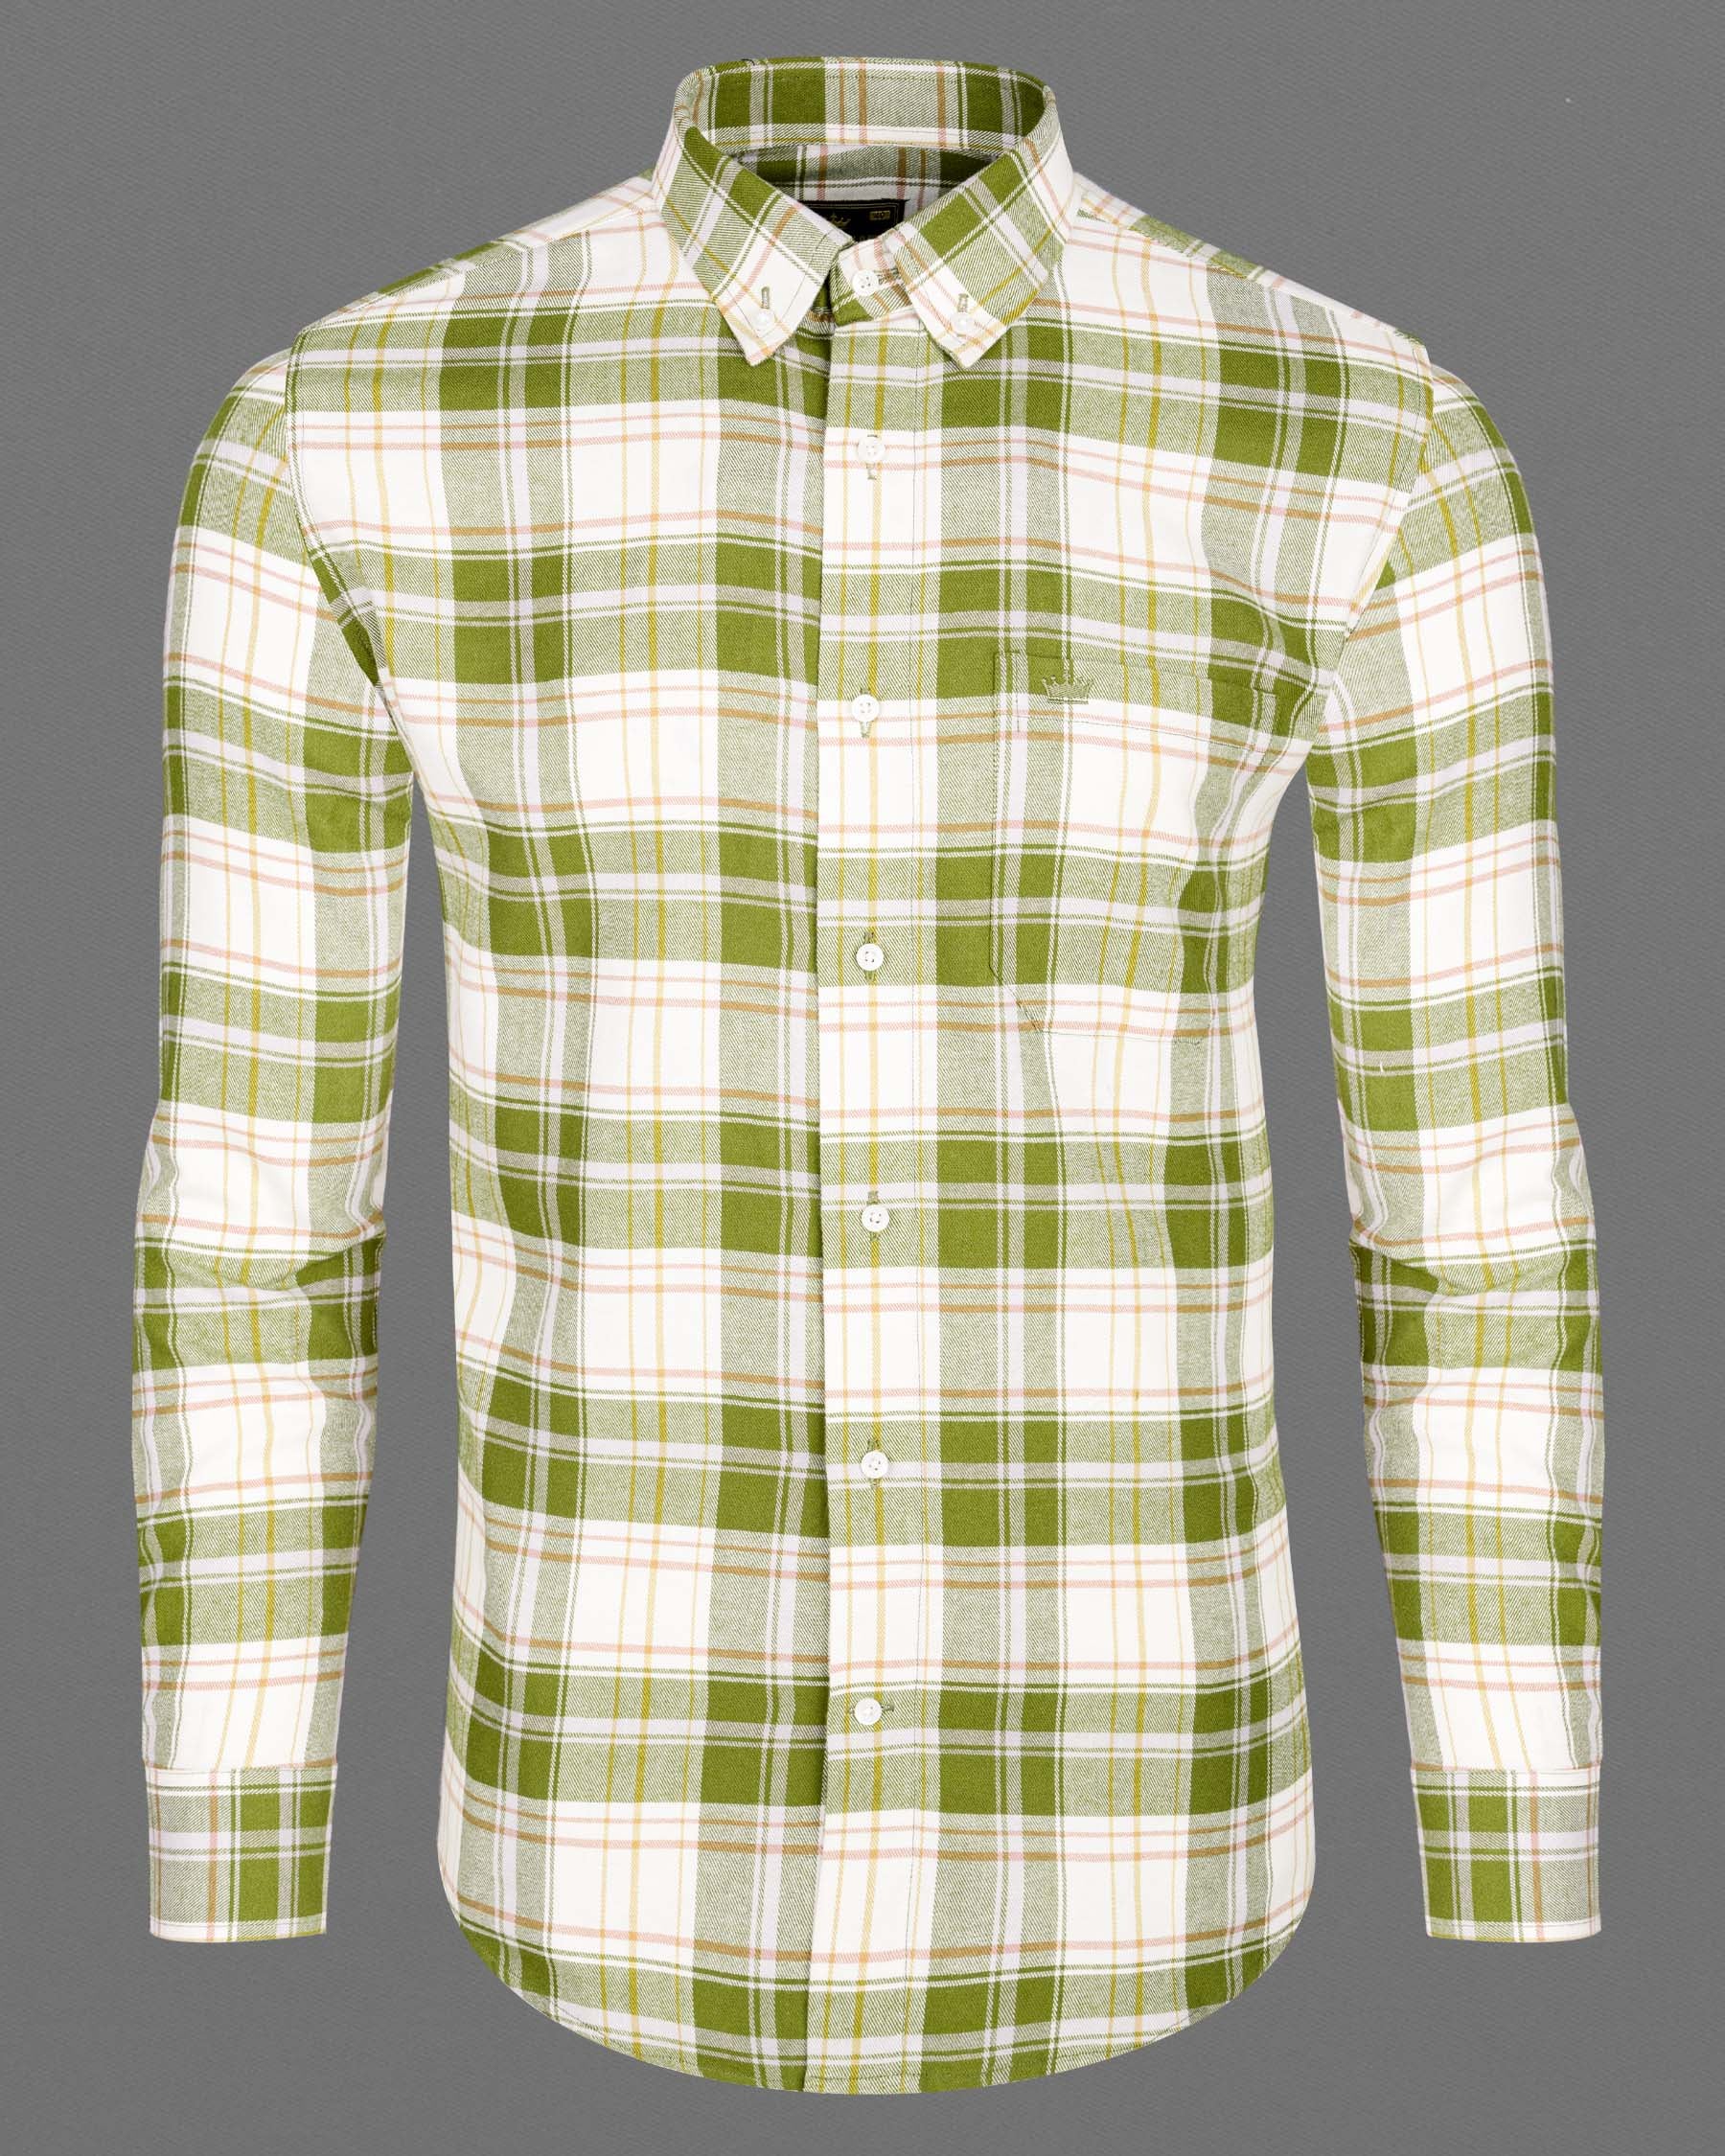 Moccasin Green and White Plaid Flannel Shirt 6984-BD-38,6984-BD-38,6984-BD-39,6984-BD-39,6984-BD-40,6984-BD-40,6984-BD-42,6984-BD-42,6984-BD-44,6984-BD-44,6984-BD-46,6984-BD-46,6984-BD-48,6984-BD-48,6984-BD-50,6984-BD-50,6984-BD-52,6984-BD-52